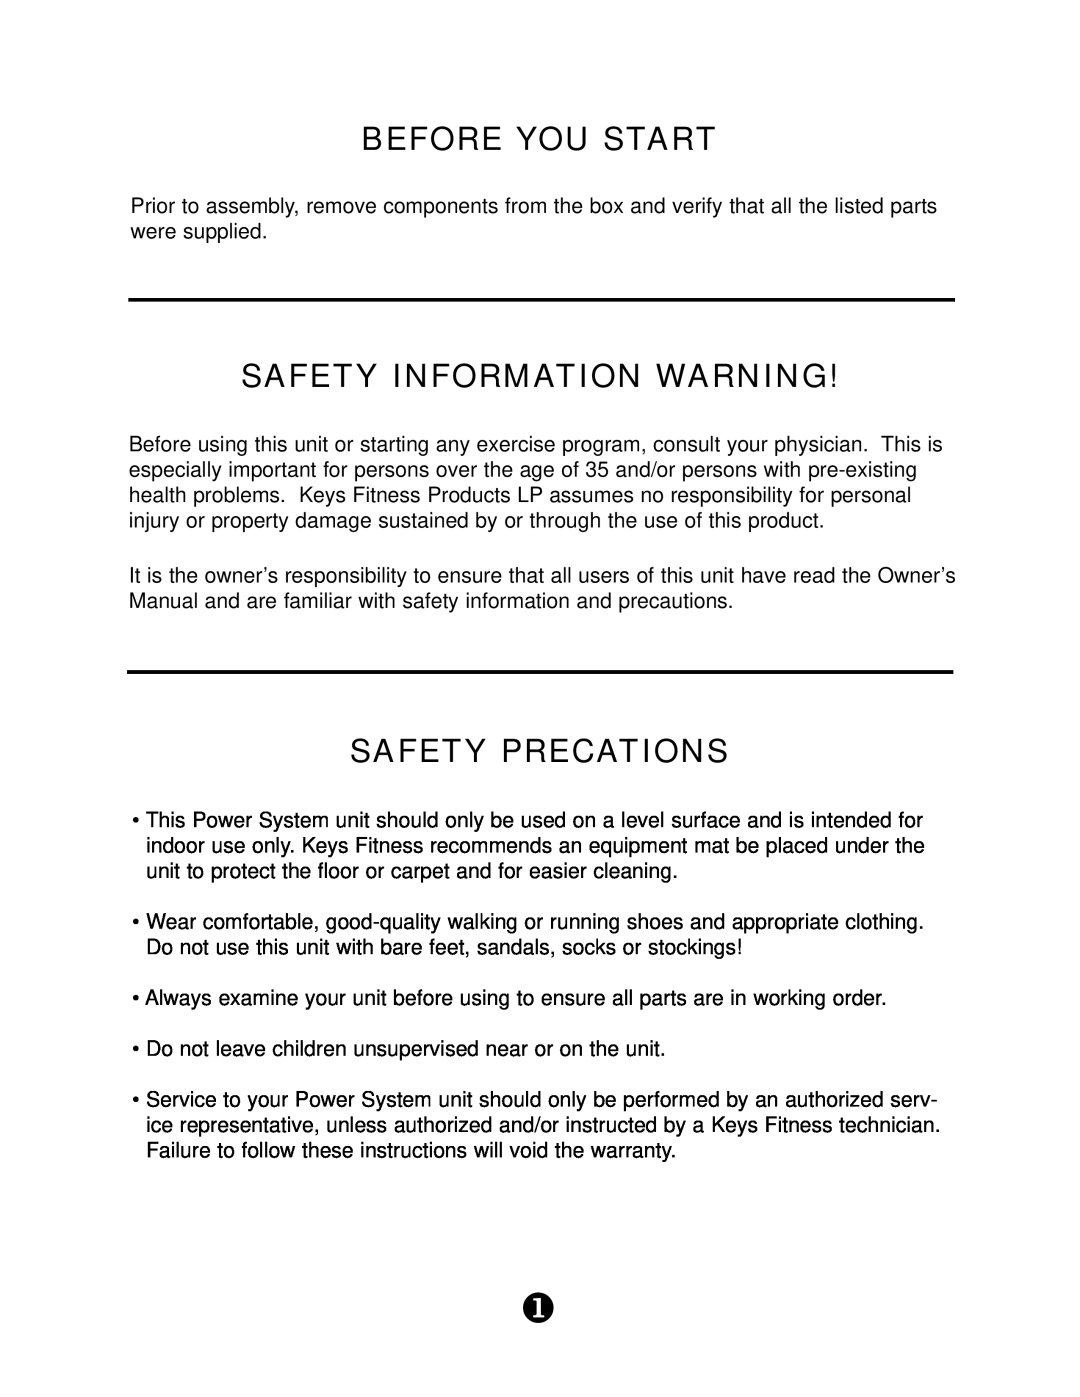 Keys Fitness KPS-PCL manual Before You Start, Safety Information Warning, Safety Precations 